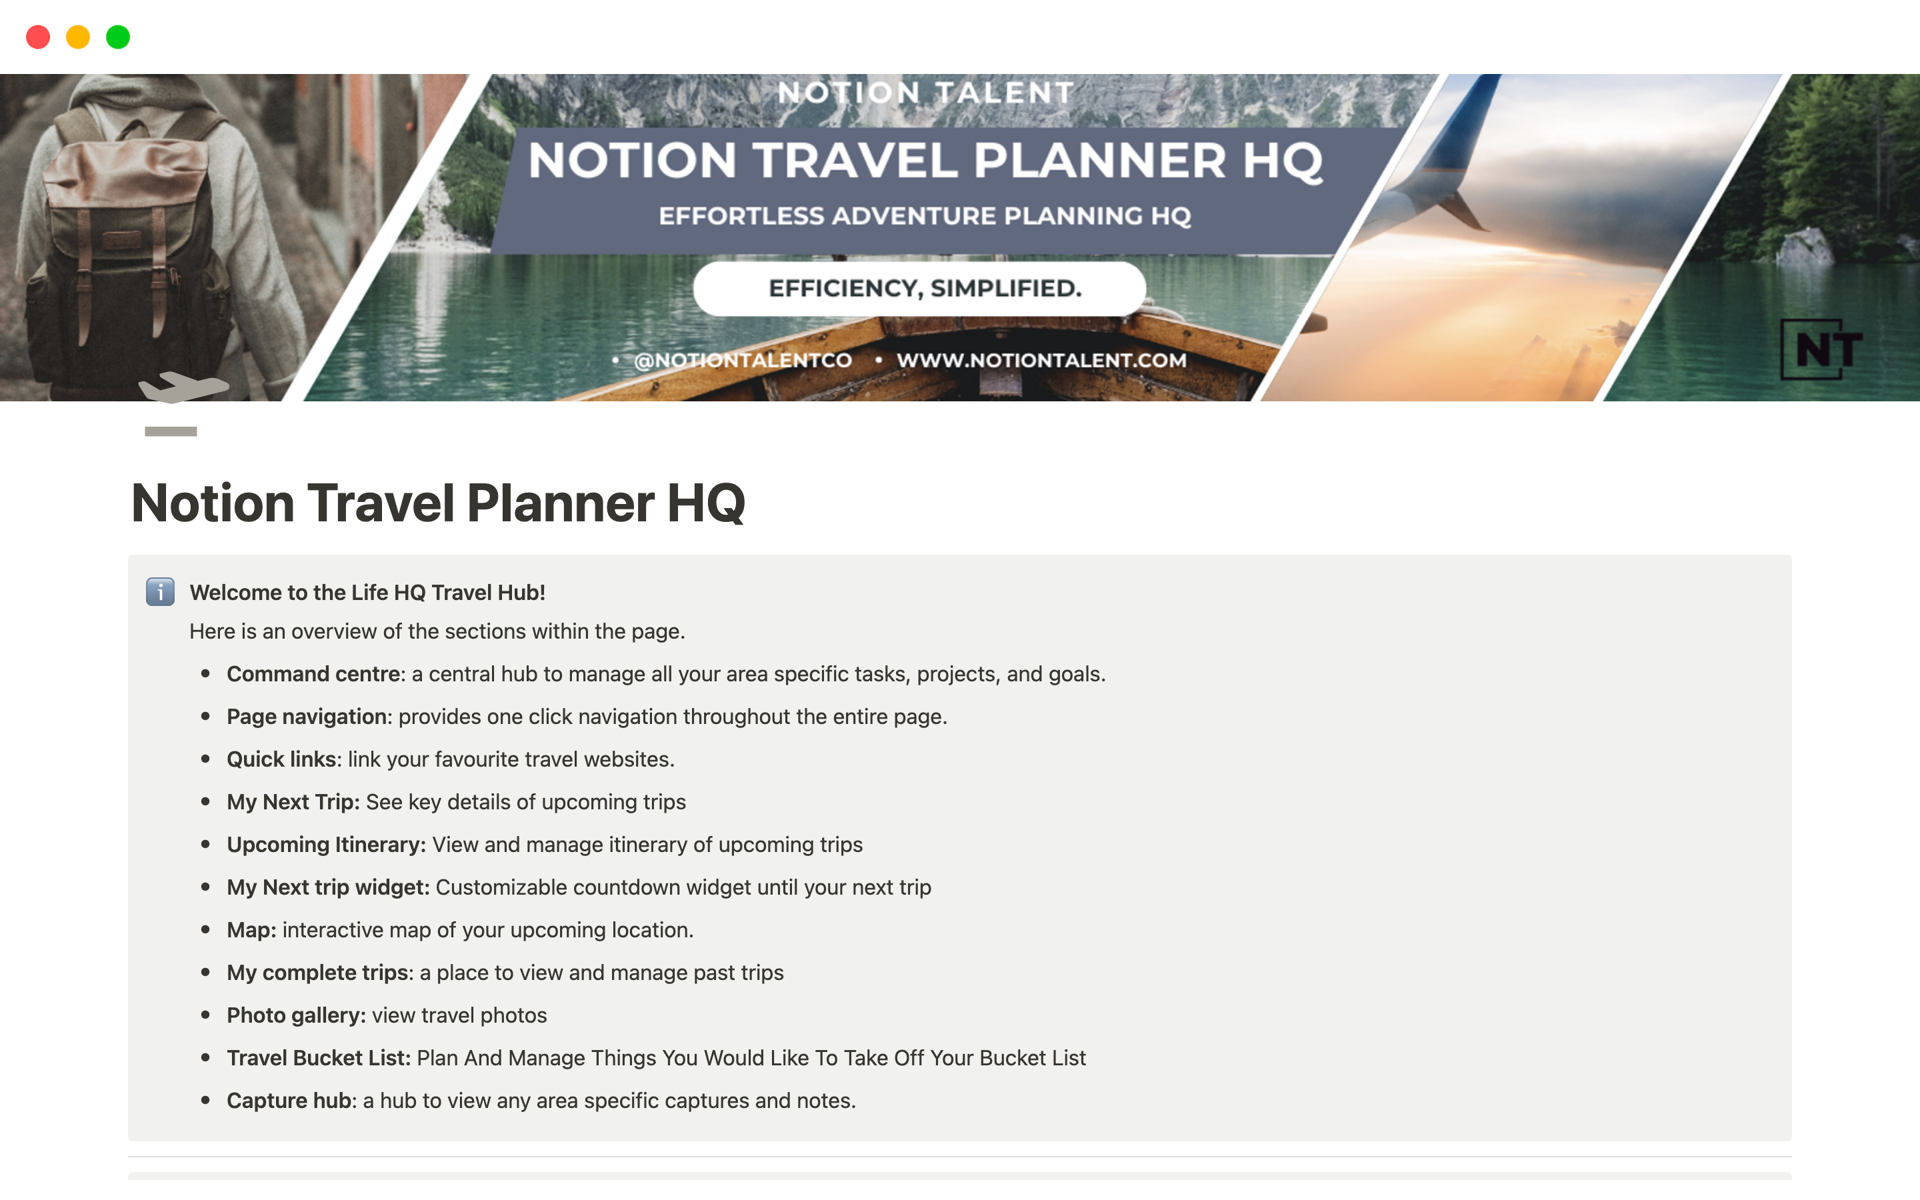 Discover the joy of organized travel with the Ultimate Notion Travel Hub, an all-encompassing Notion template designed to plan and document your journeys effortlessly.